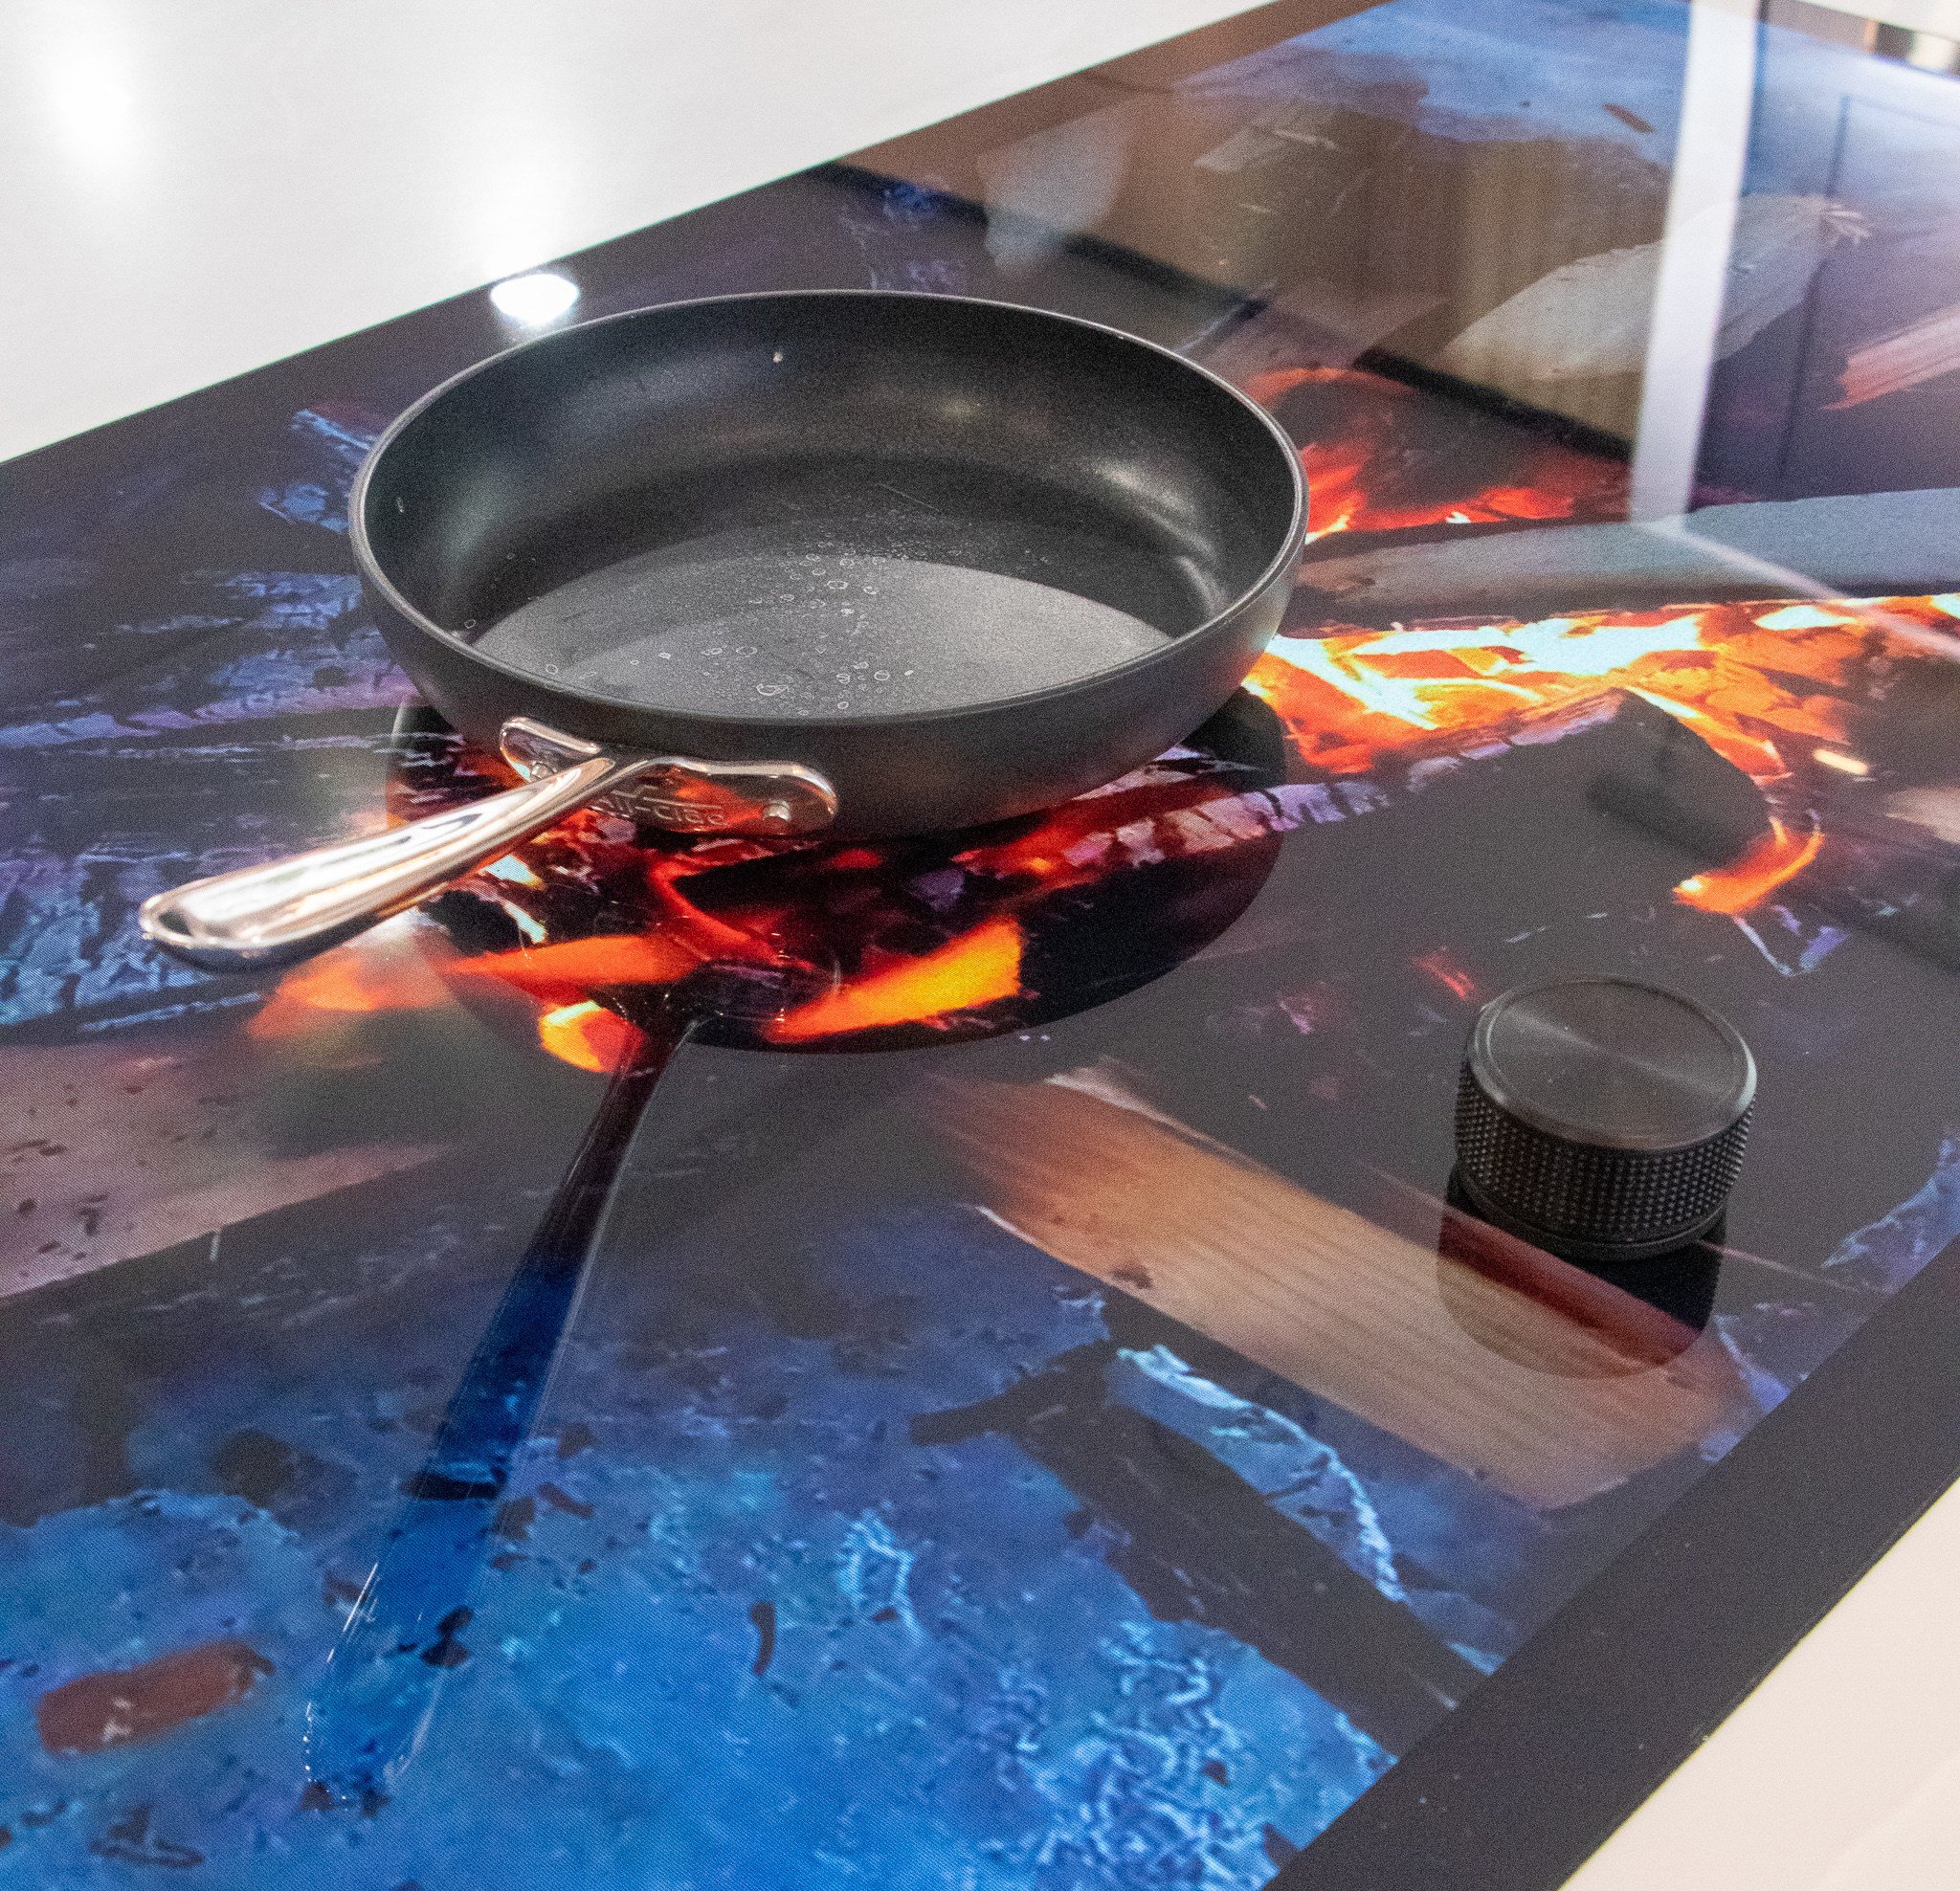 Induction cooktop with OLED display. Source: GHSP